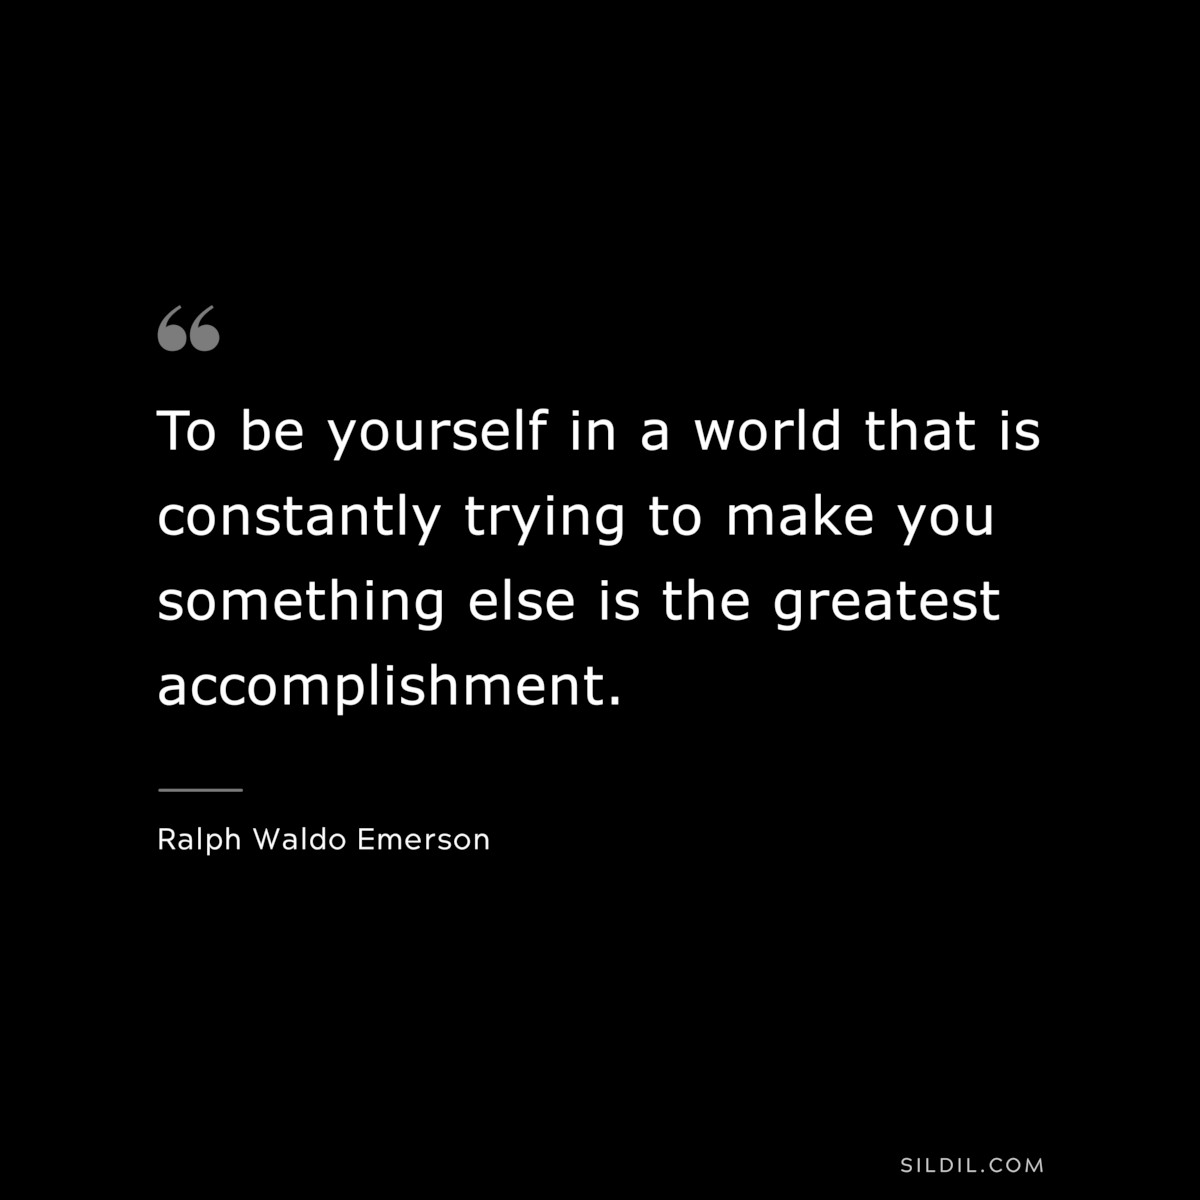 To be yourself in a world that is constantly trying to make you something else is the greatest accomplishment. — Ralph Waldo Emerson